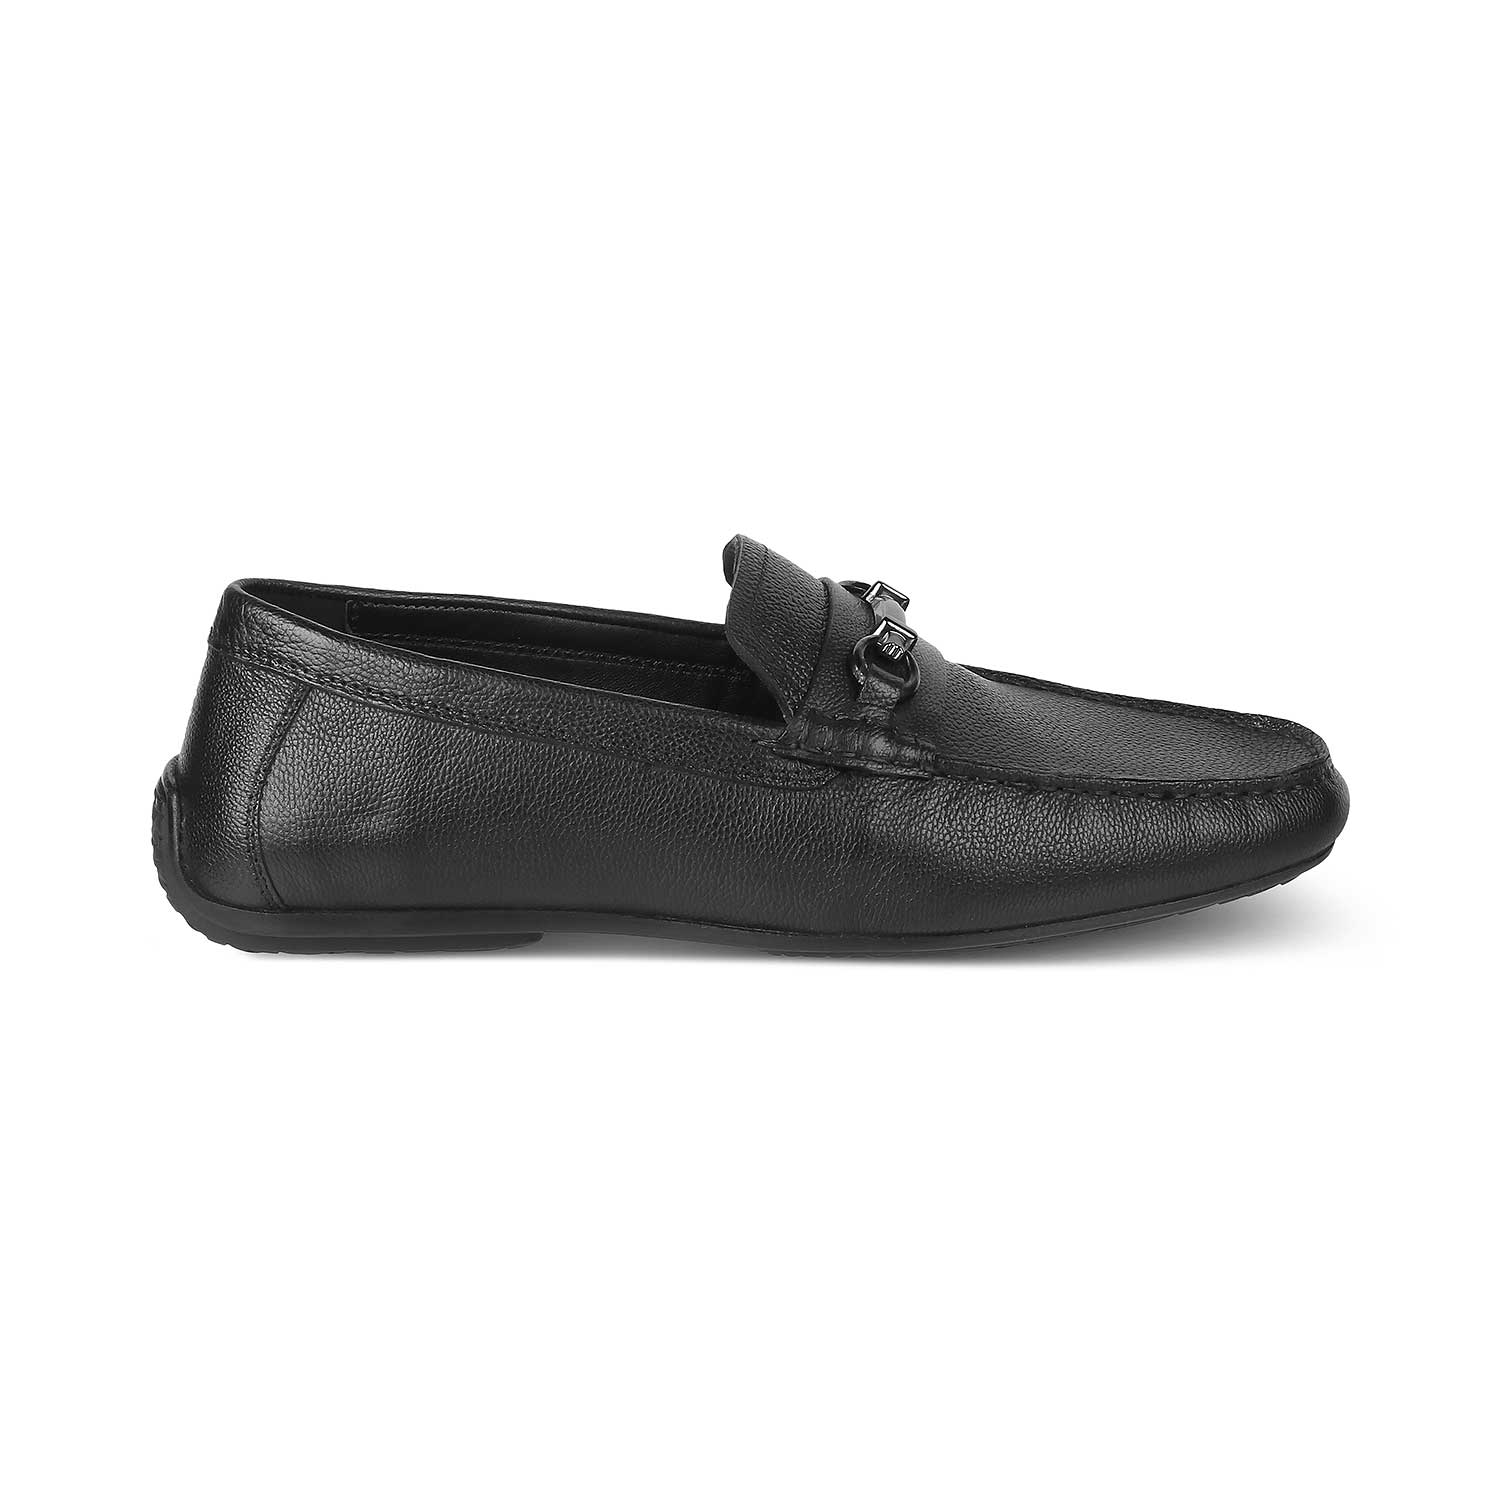 Tresmode-The Sandee Black Men's Leather Driving Loafers Tresmode-Tresmode